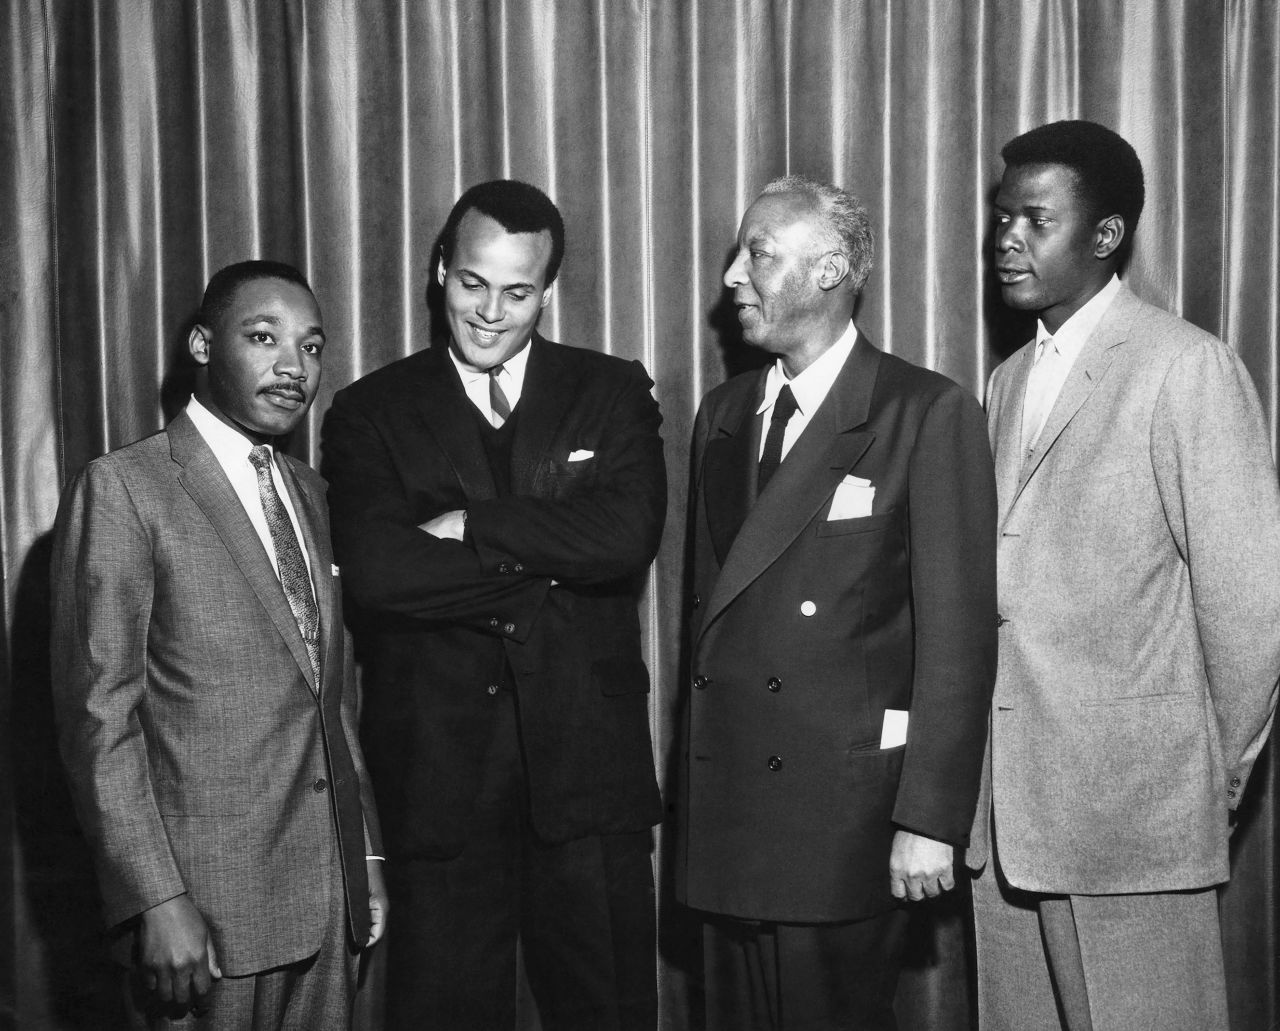 Civil rights leader Martin Luther King Jr., left, is joined by, from left, singer and actor Harry Belafonte, activist Asa Philip Randolph and Poitier circa 1960. A few years later, Poitier was one of the Hollywood celebrities who attended the 1963 March on Washington.